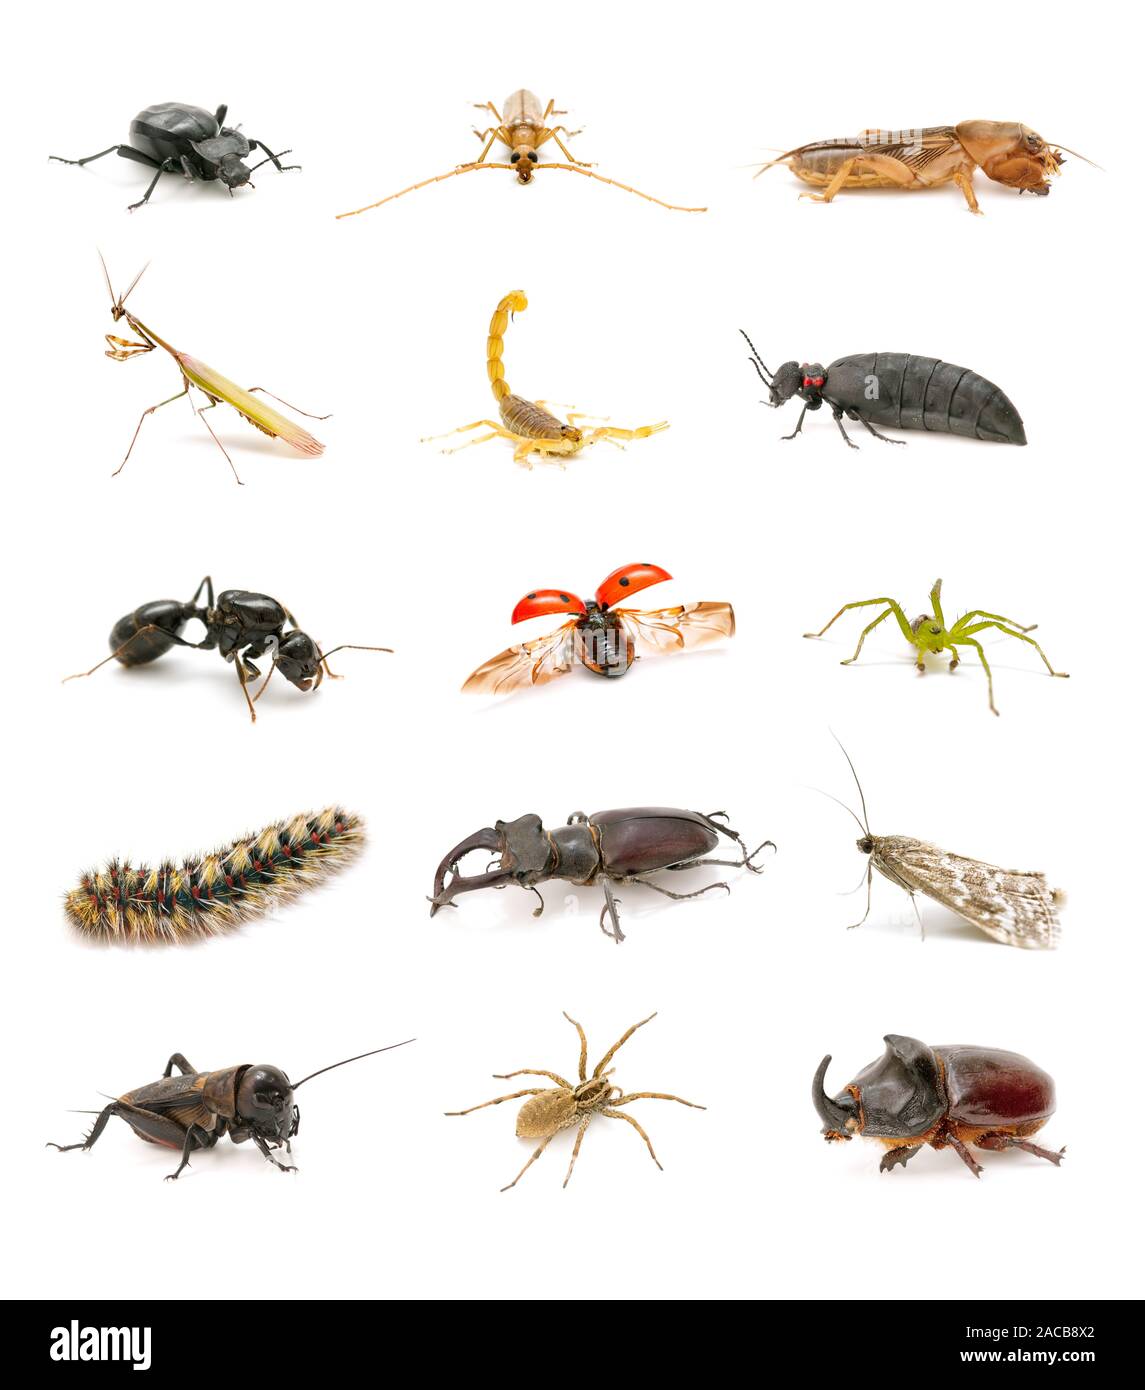 insect collection isolated on white background Stock Photo